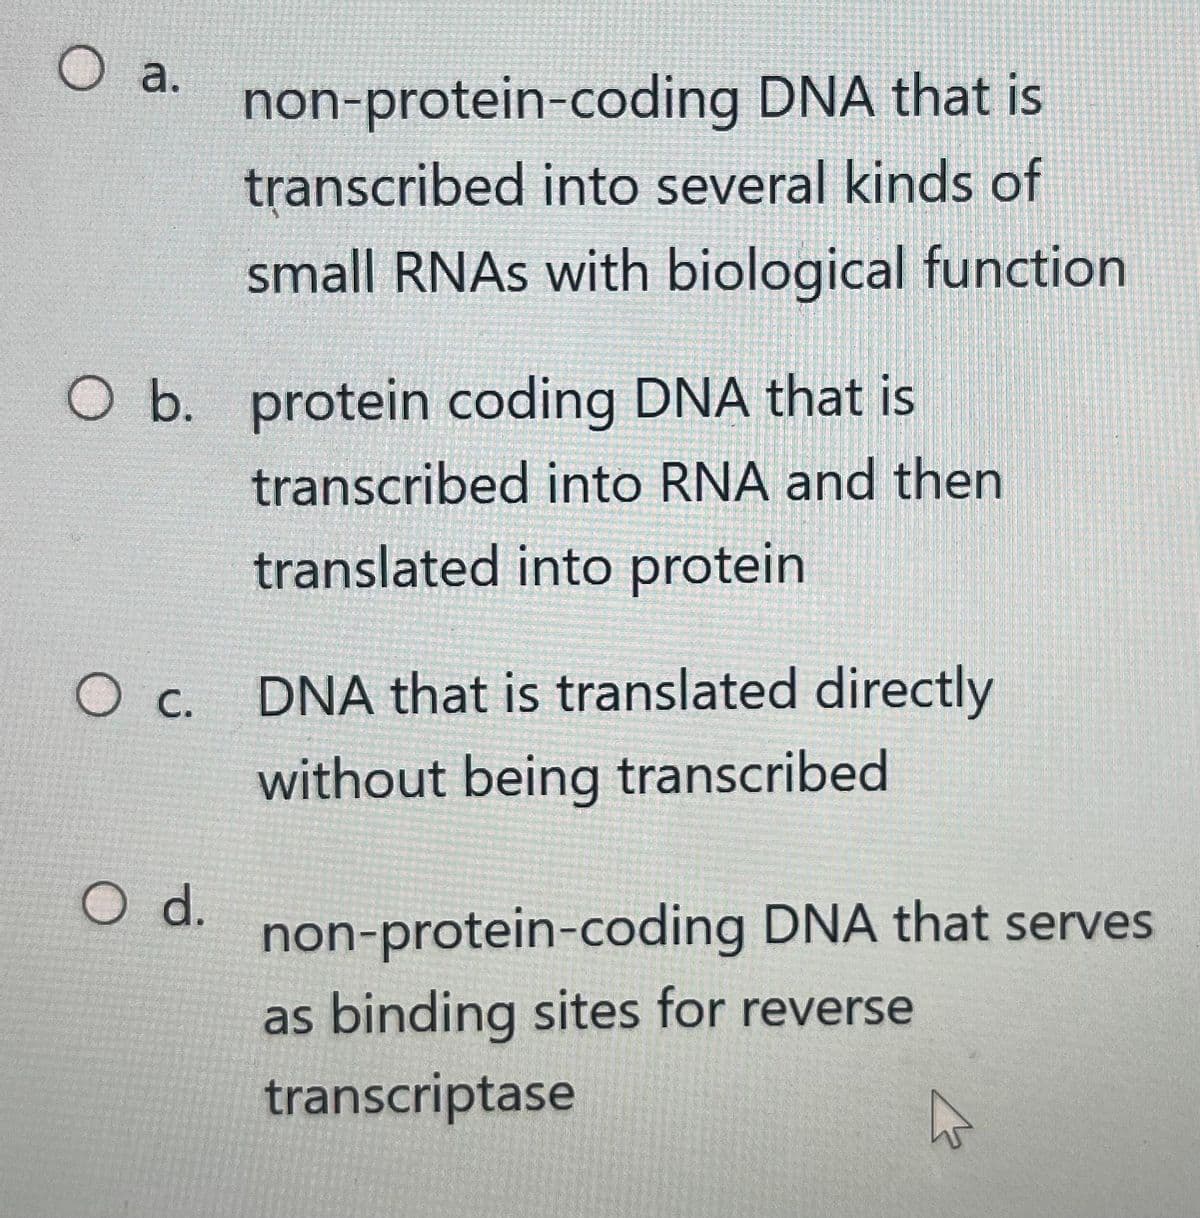 O a.
O b. protein coding DNA that is
transcribed into RNA and then
translated into protein
O c.
non-protein-coding DNA that is
transcribed into several kinds of
small RNAs with biological function
O d.
DNA that is translated directly
without being transcribed
non-protein-coding DNA that serves
as binding sites for reverse
transcriptase